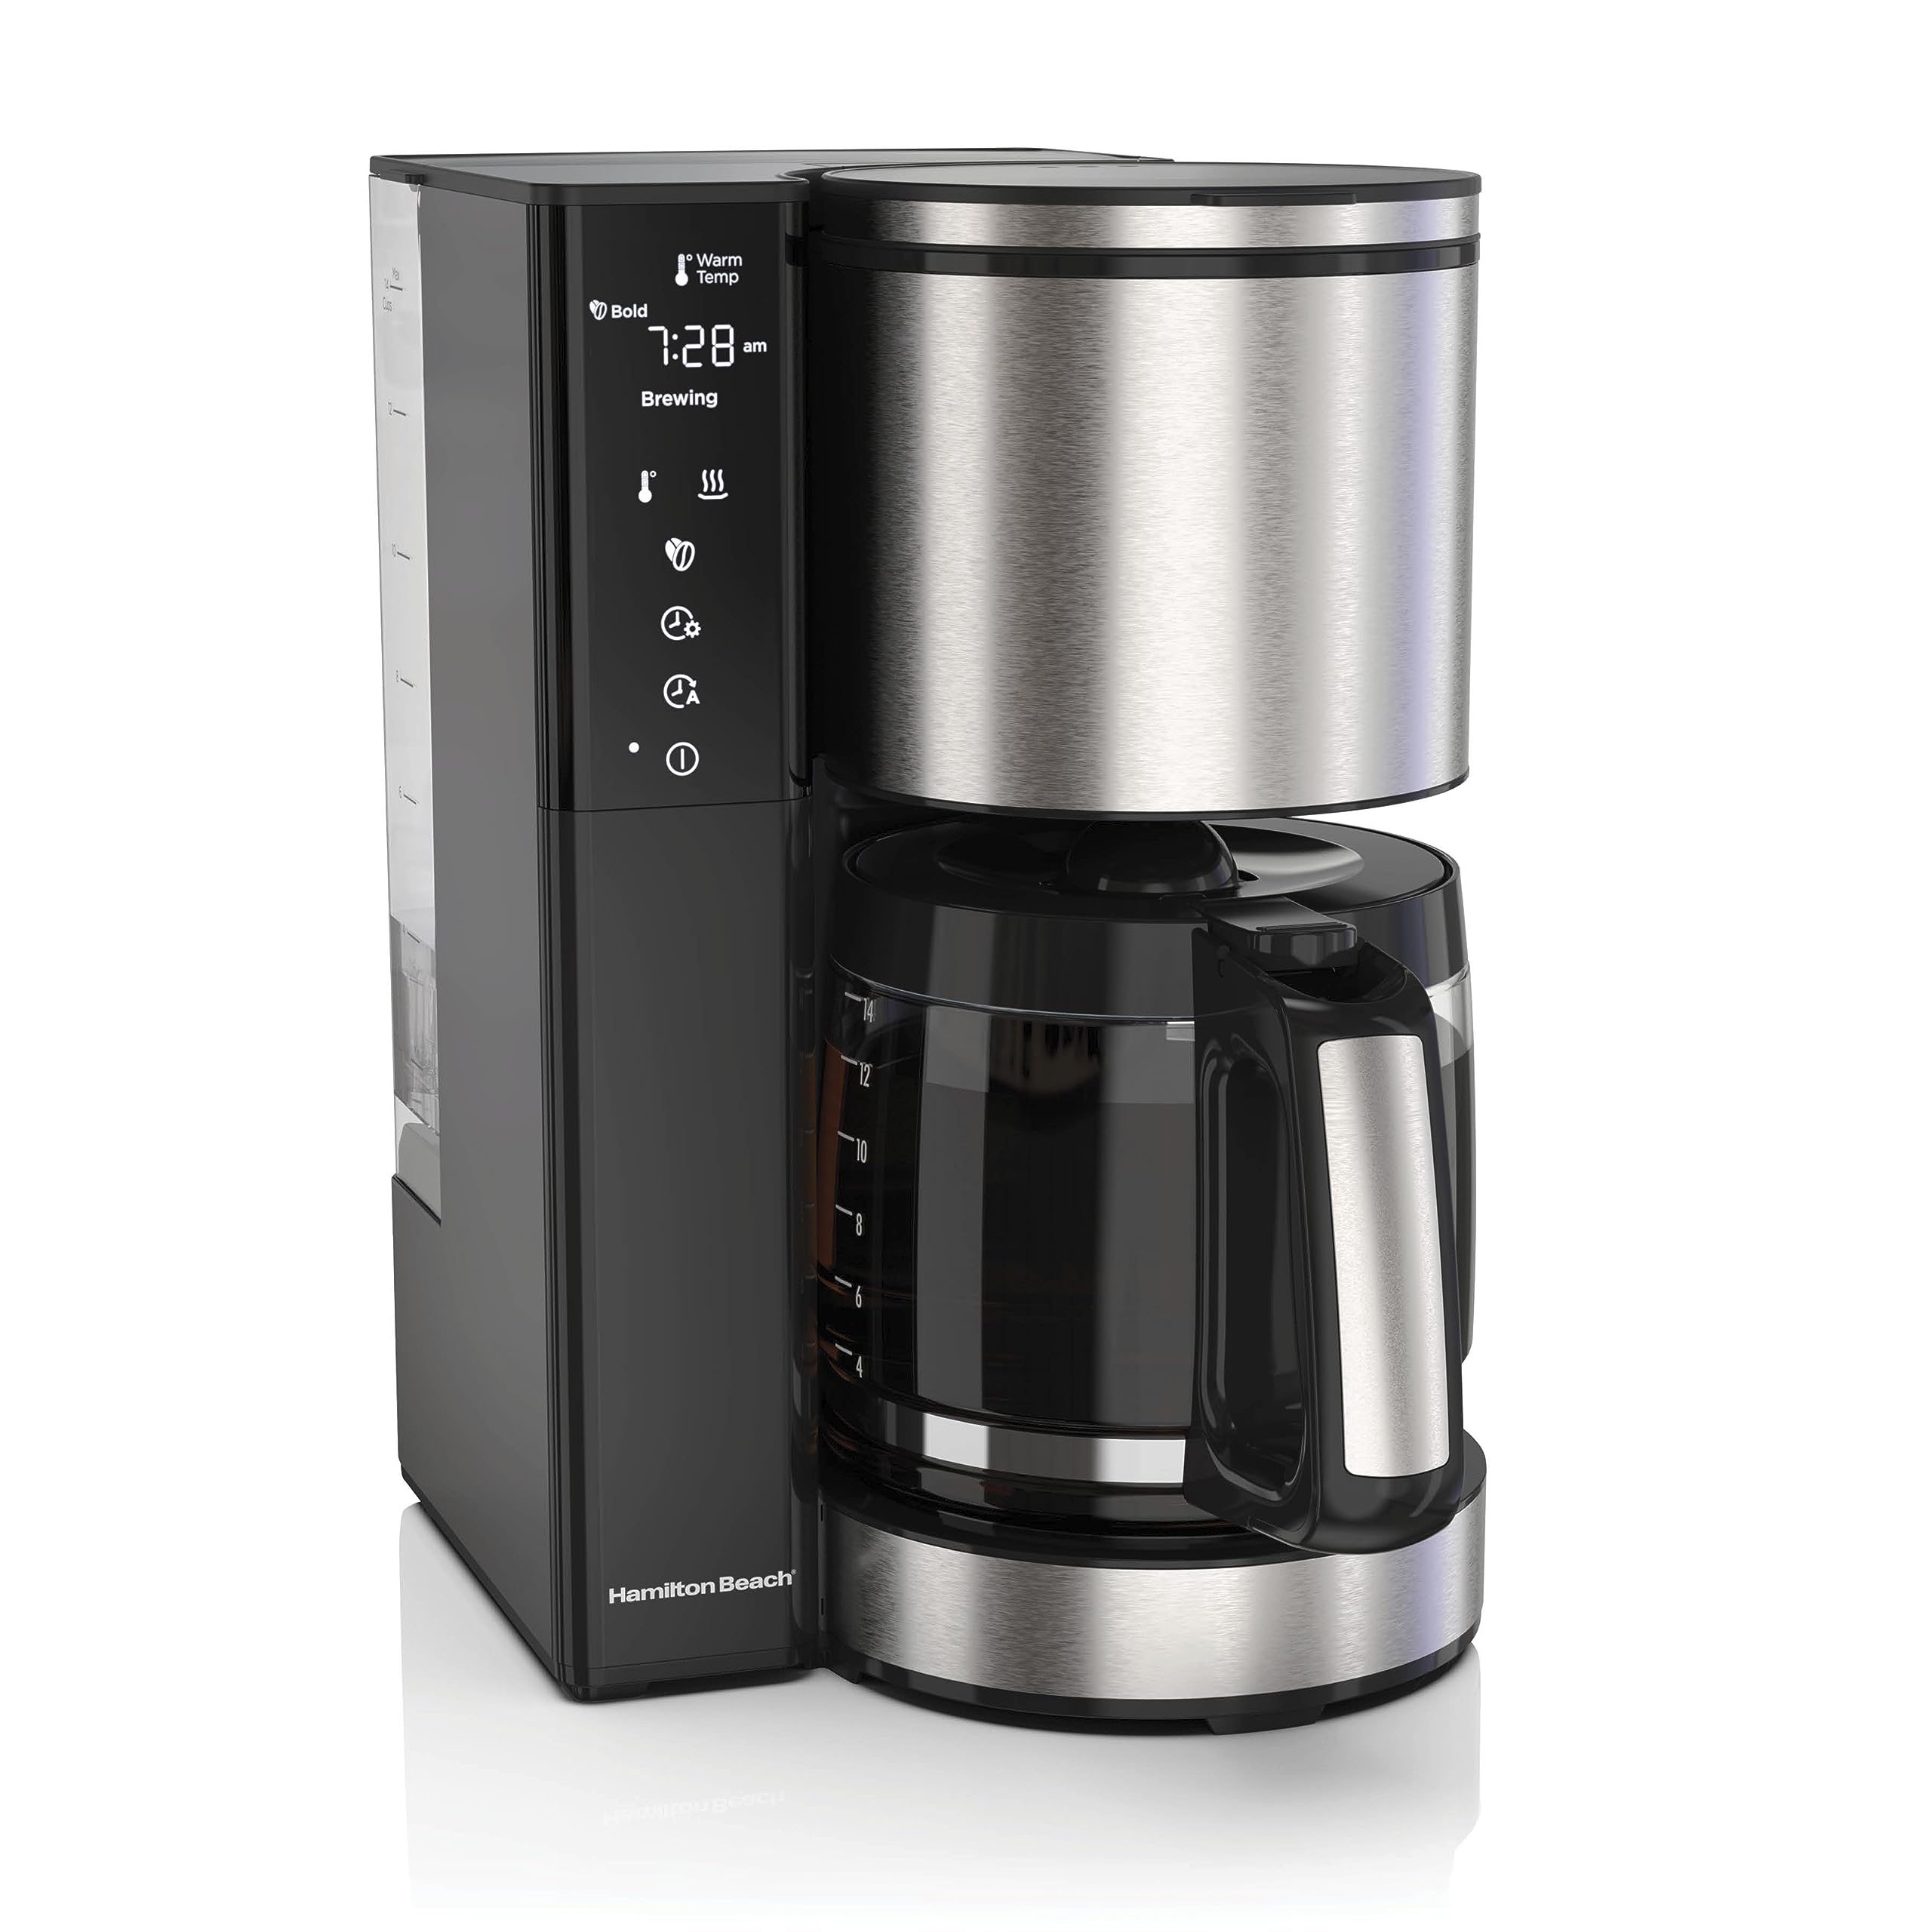 Hamilton Beach 14 Cup Programmable Coffee Maker with Easy Measure Light Up Reusable Filter, Removable 70 Oz. Water Reservoir, Black and Stainless Steel